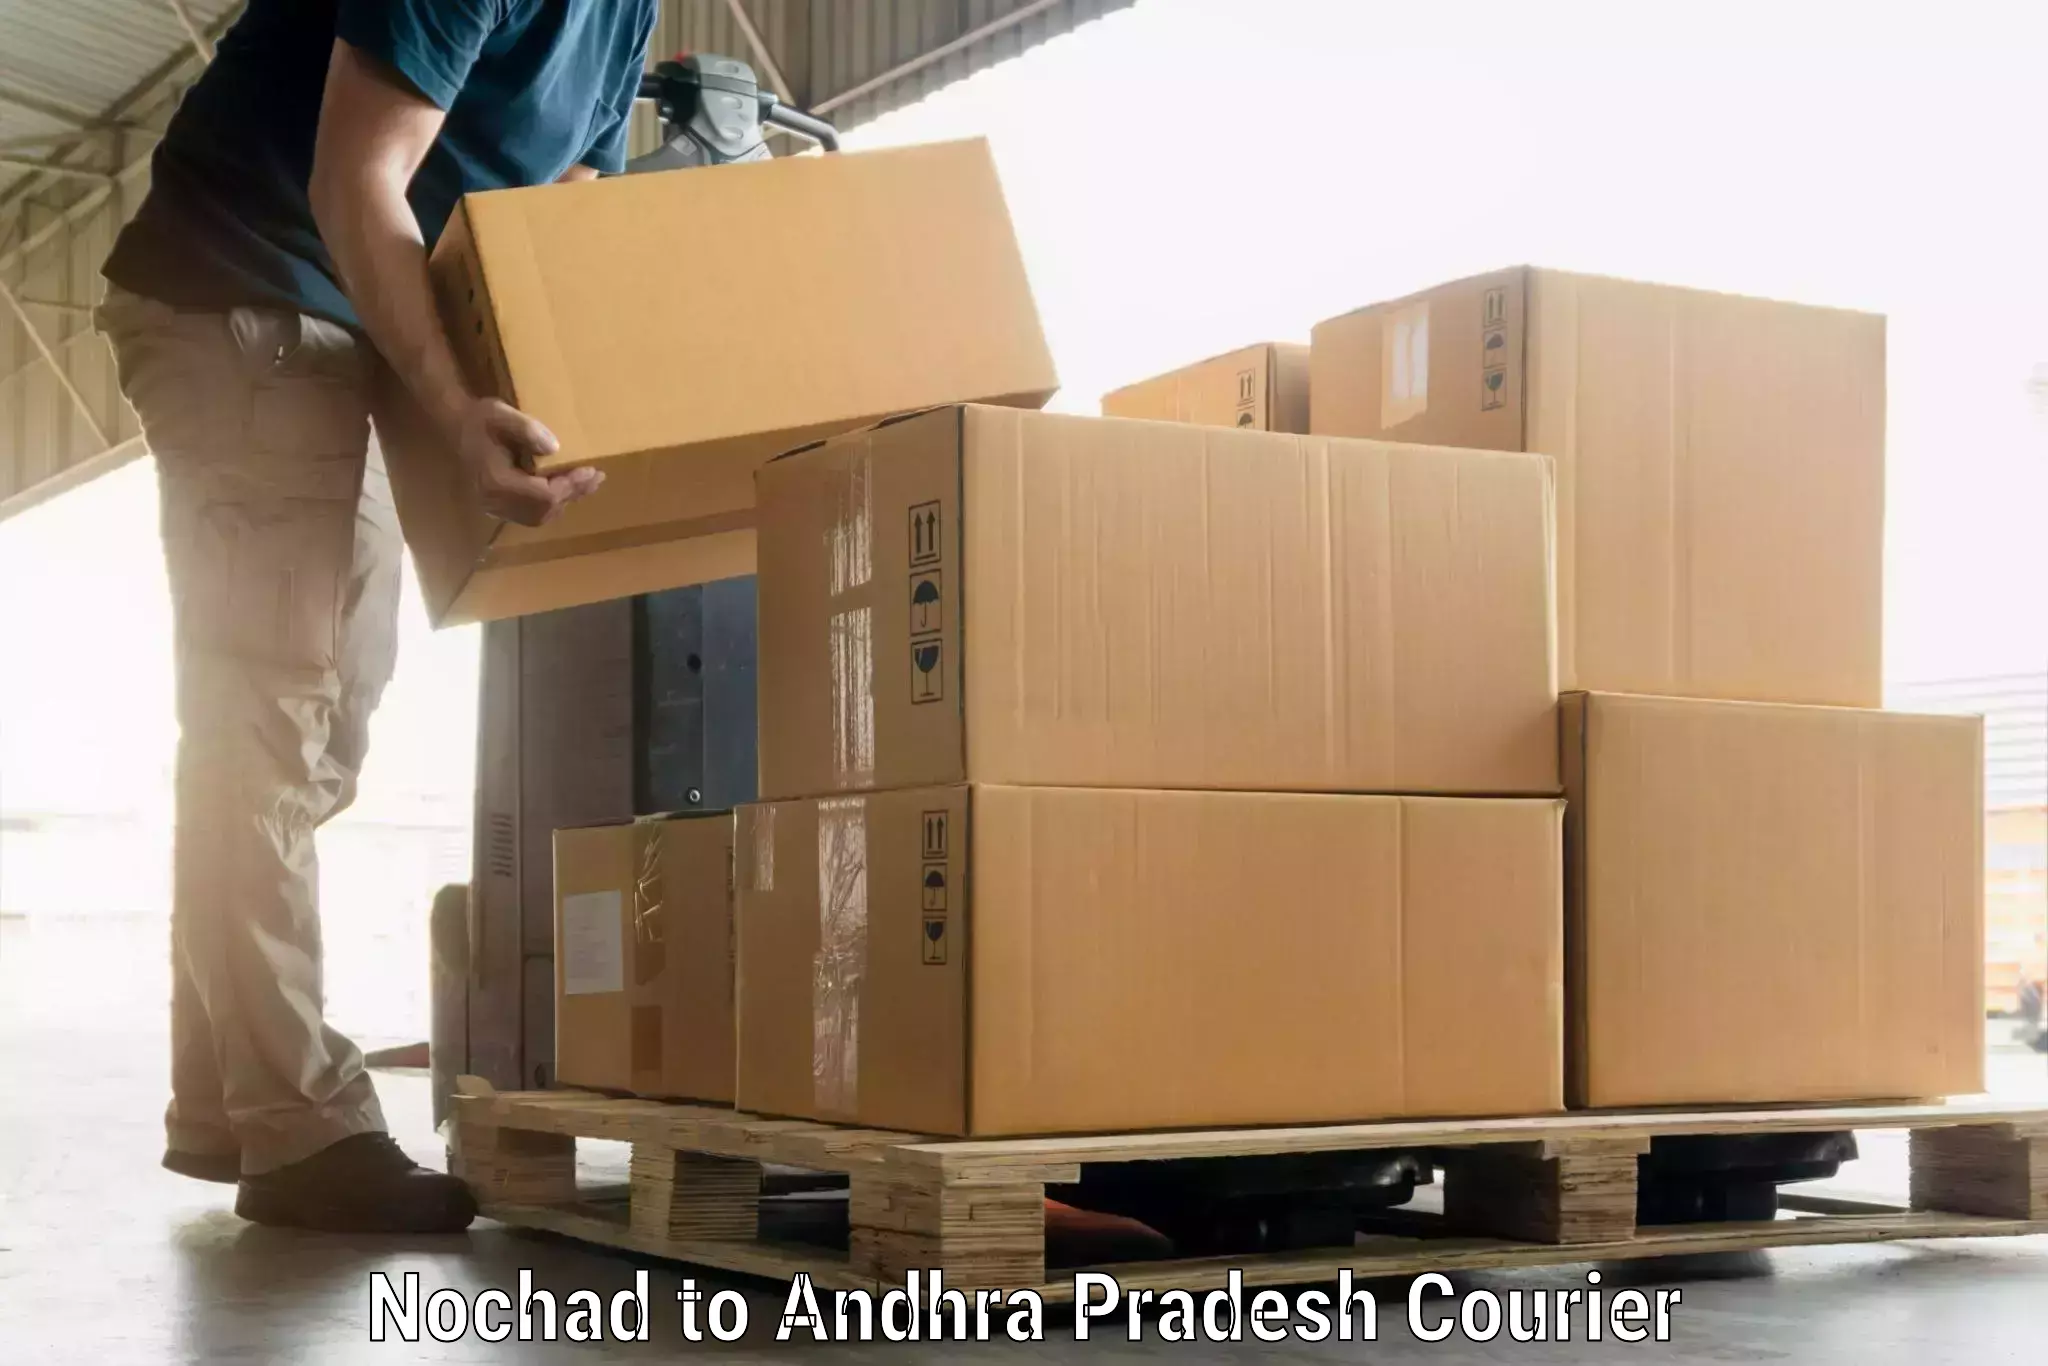 Baggage shipping rates calculator Nochad to Tripuranthakam